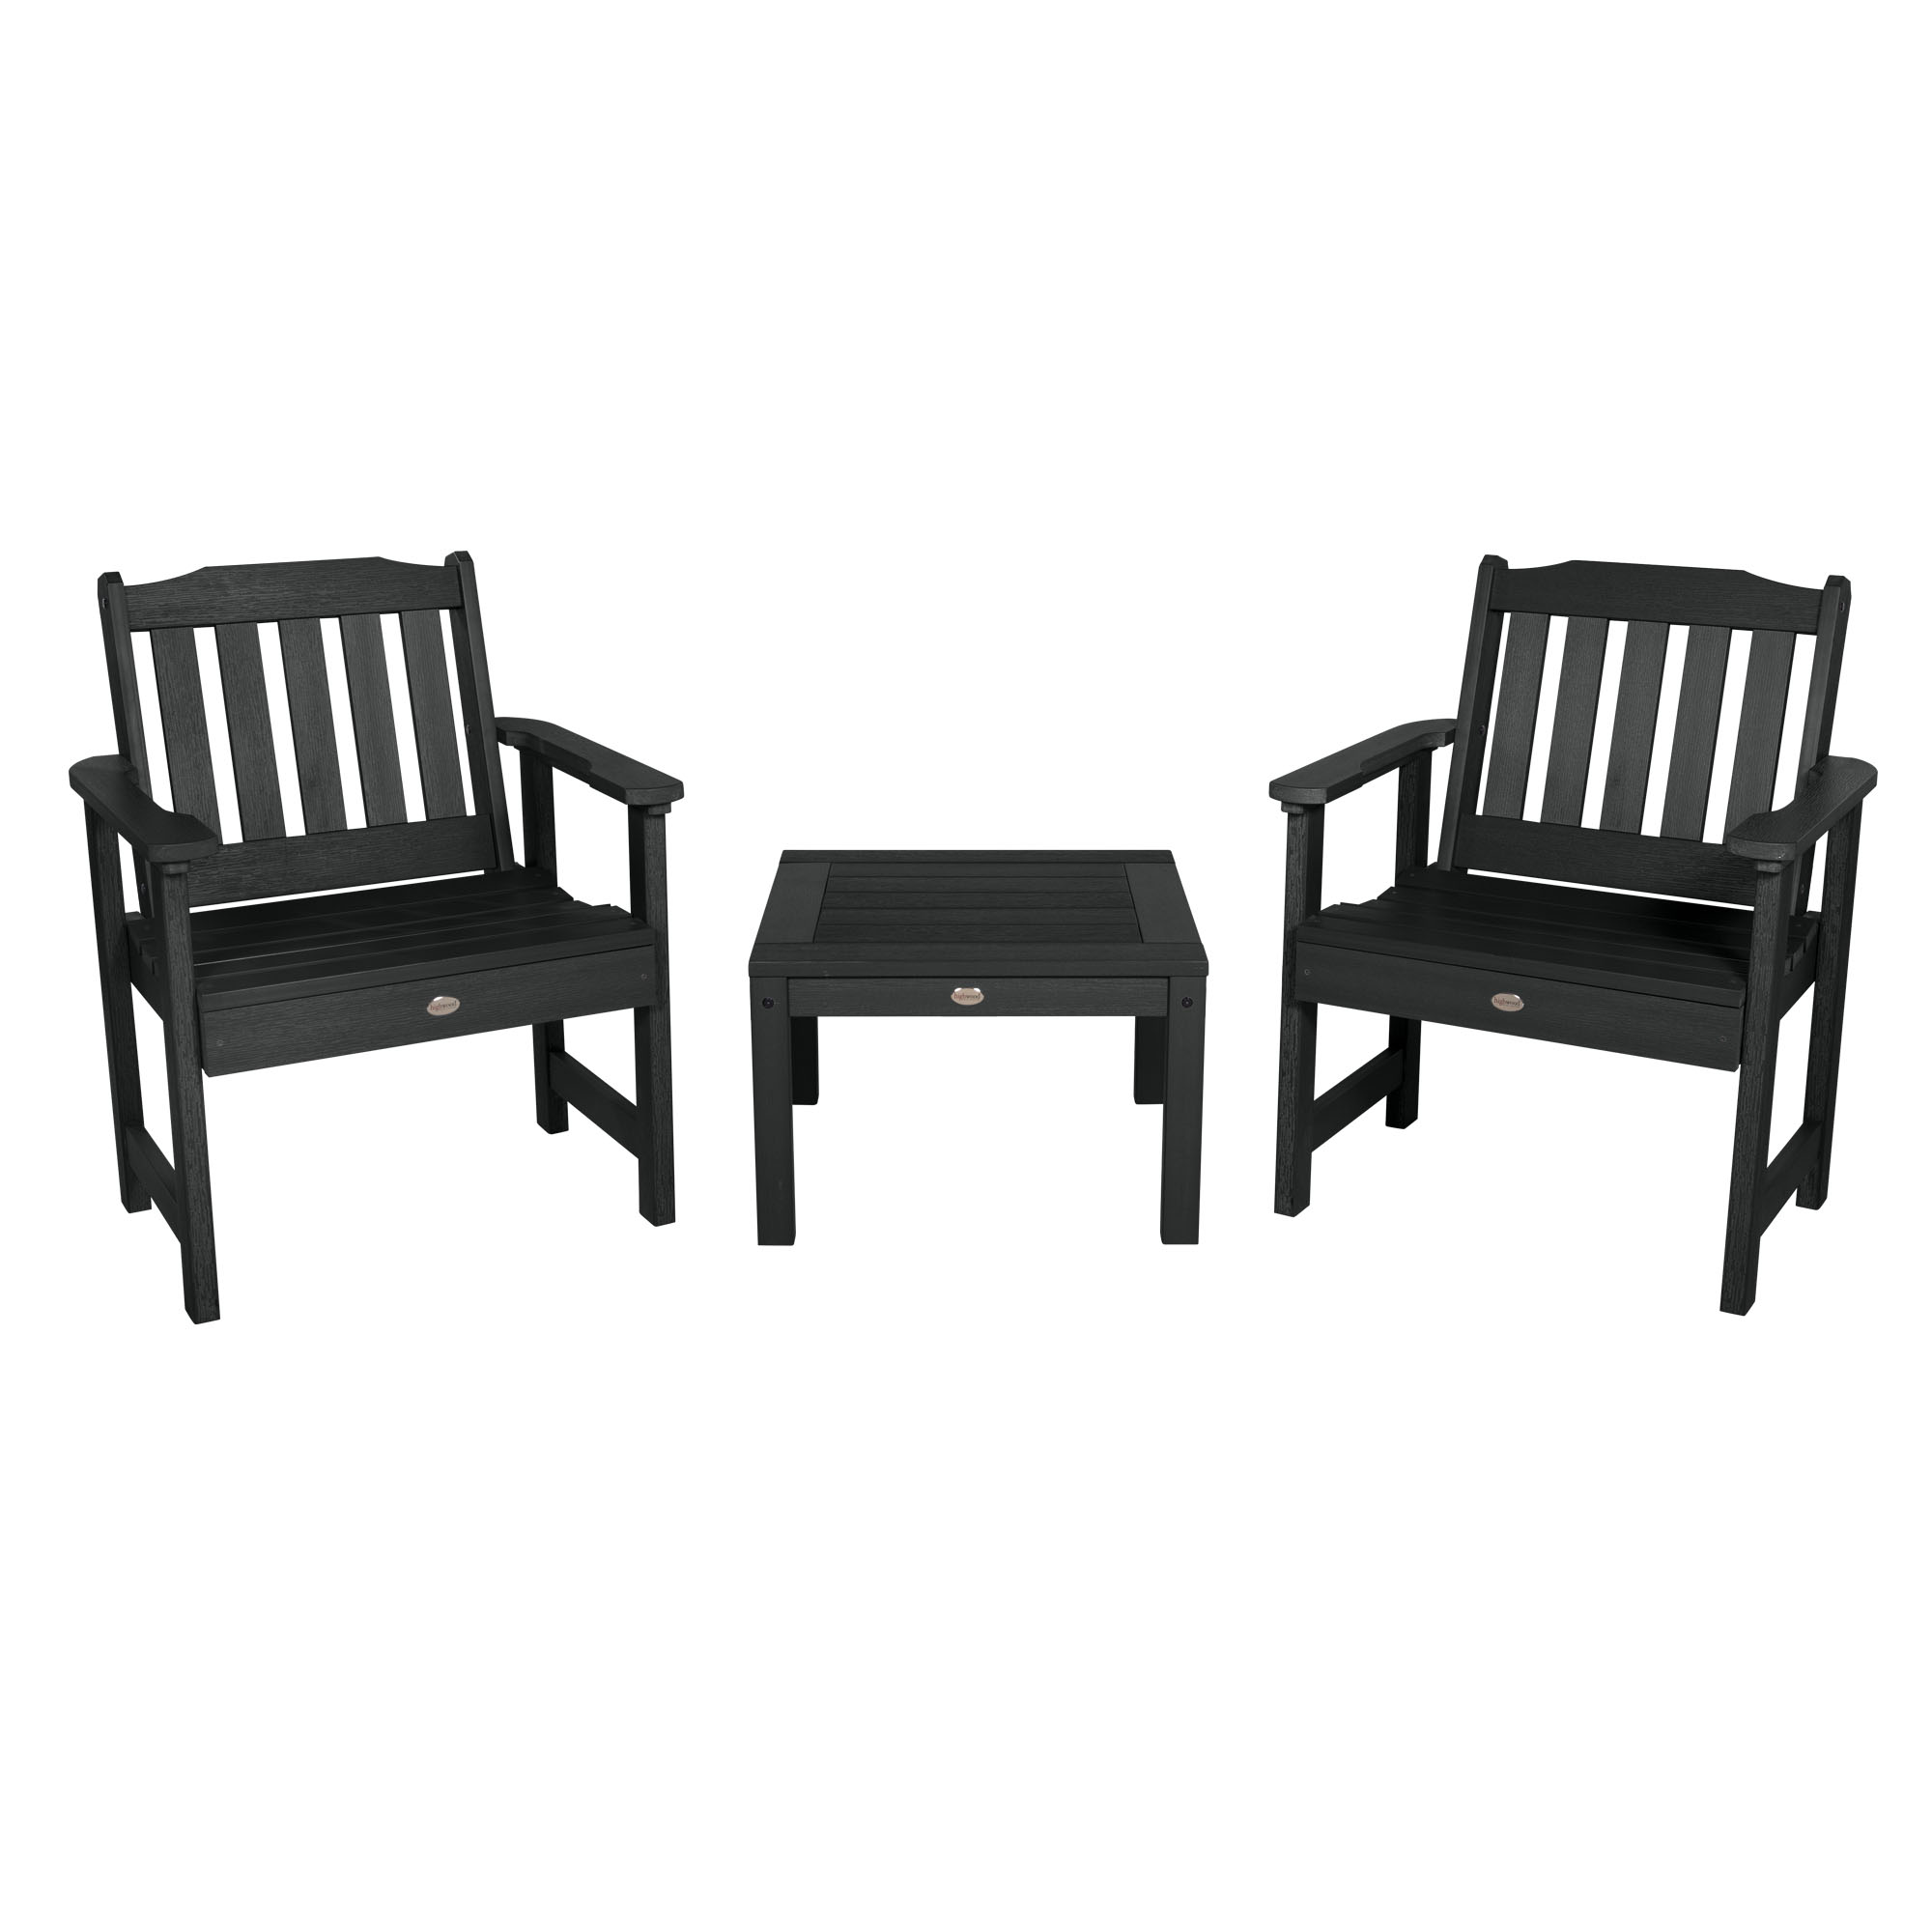 Highwood 3pc Lehigh Garden Chair Set with 1 Adirondack Square Side Table - image 1 of 7